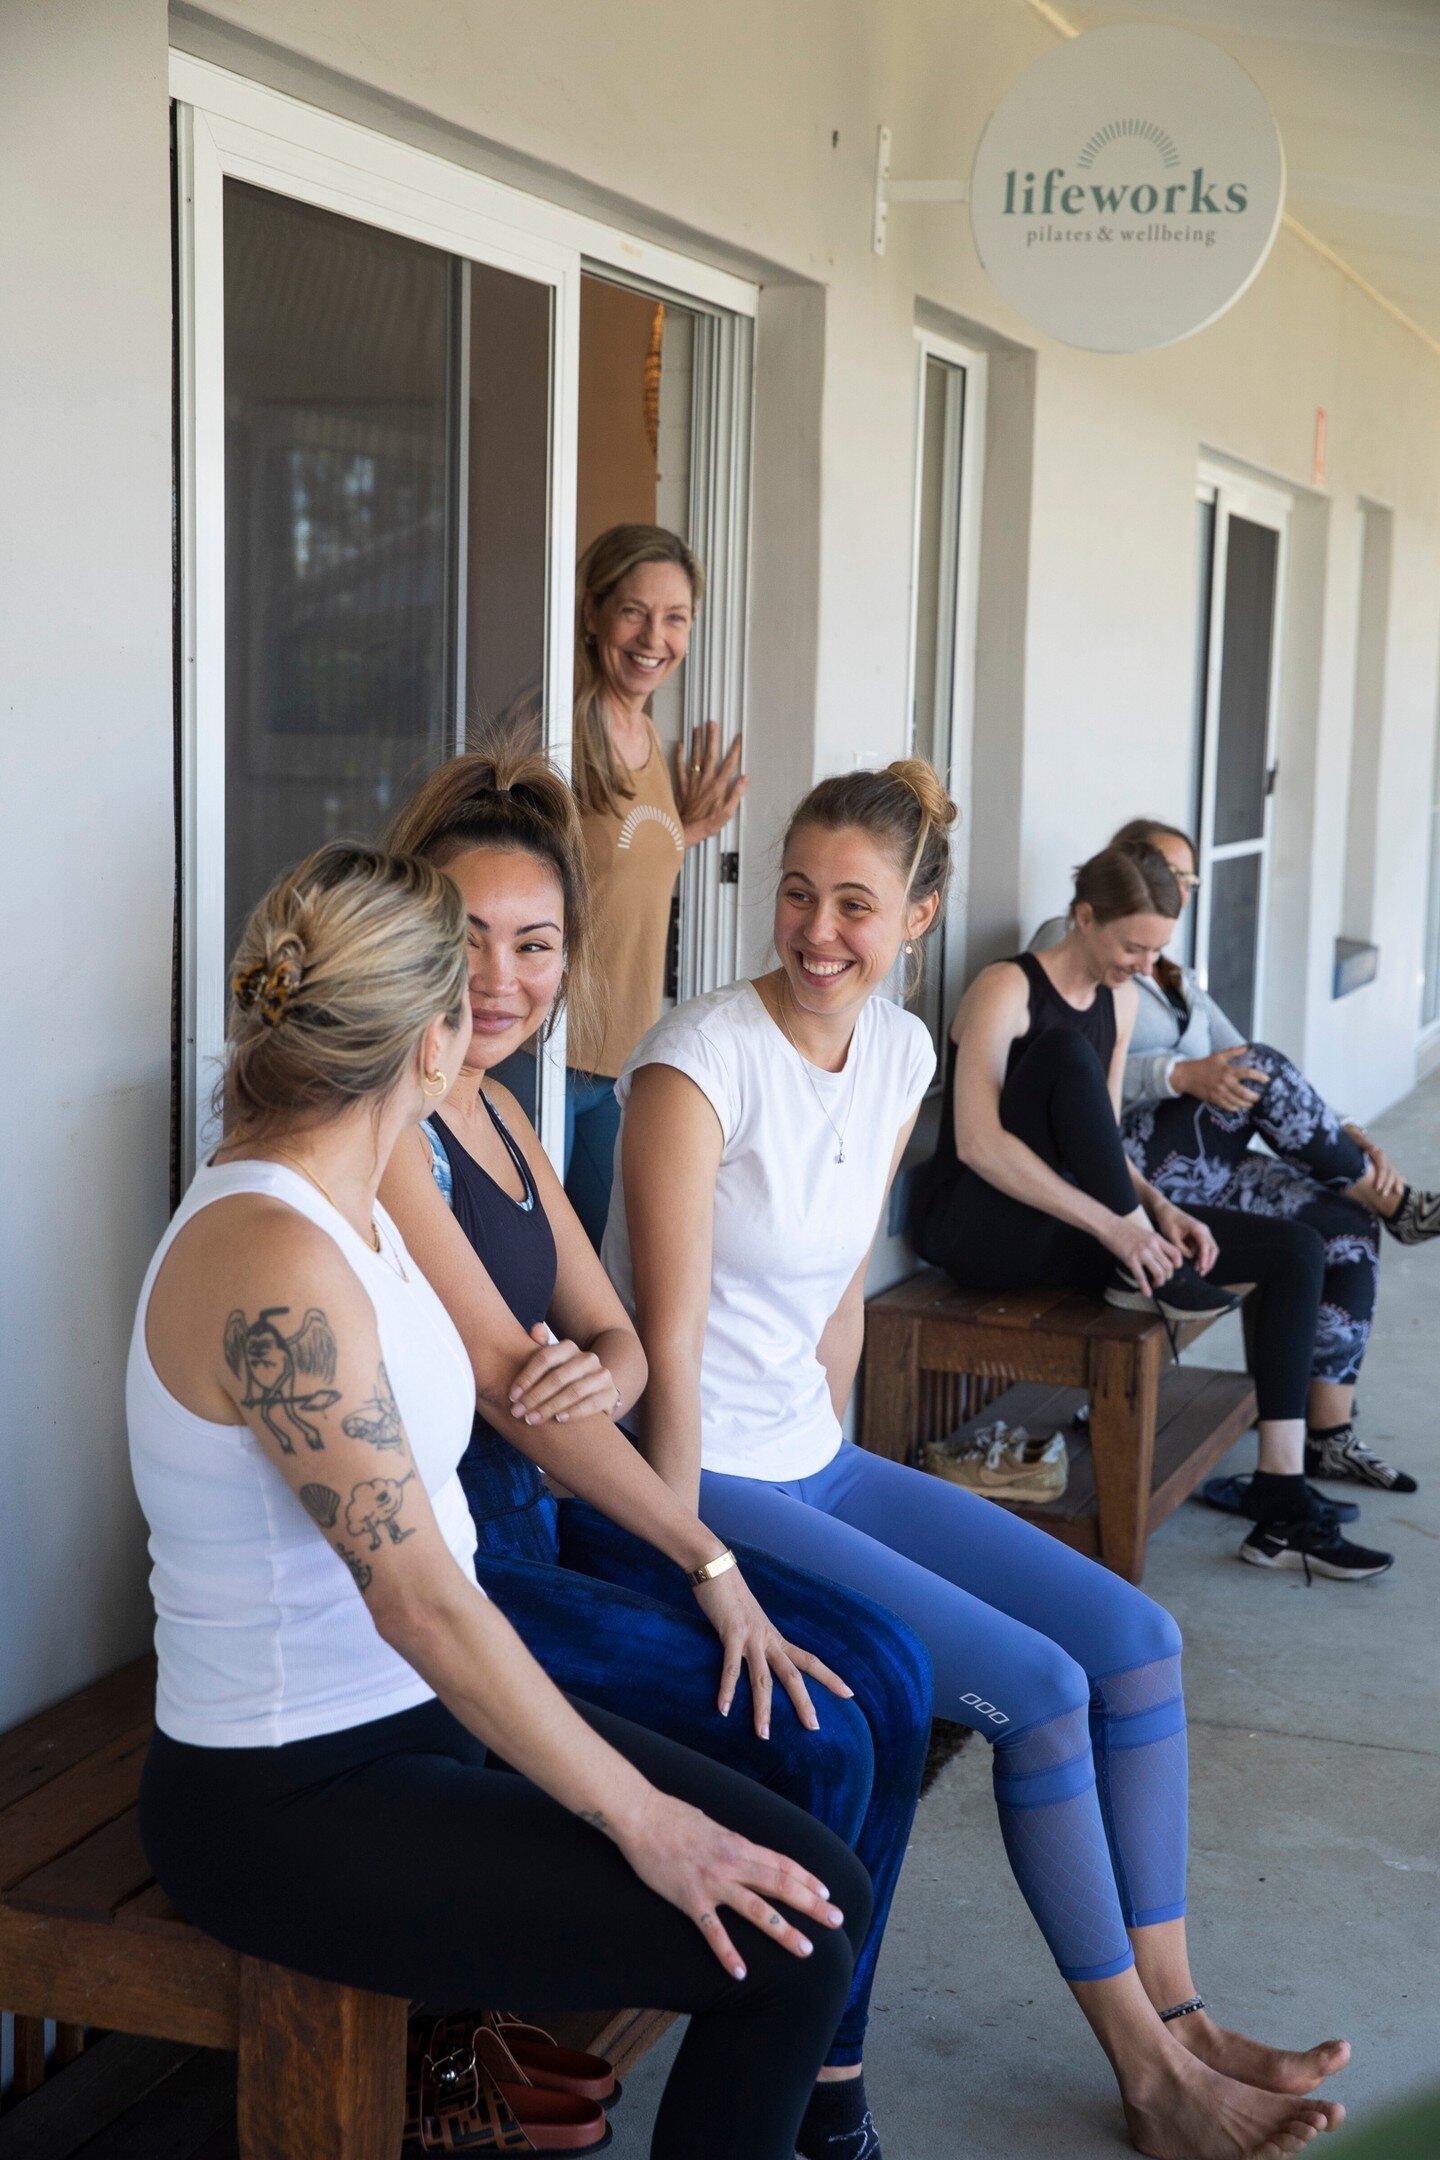 Lifeworks is more than Pilates: it's a community fostering meaningful connections, providing support, a sense of belonging, and cultivating lasting friendships. In a time where many find themselves isolated whilst working from home or moving to the r